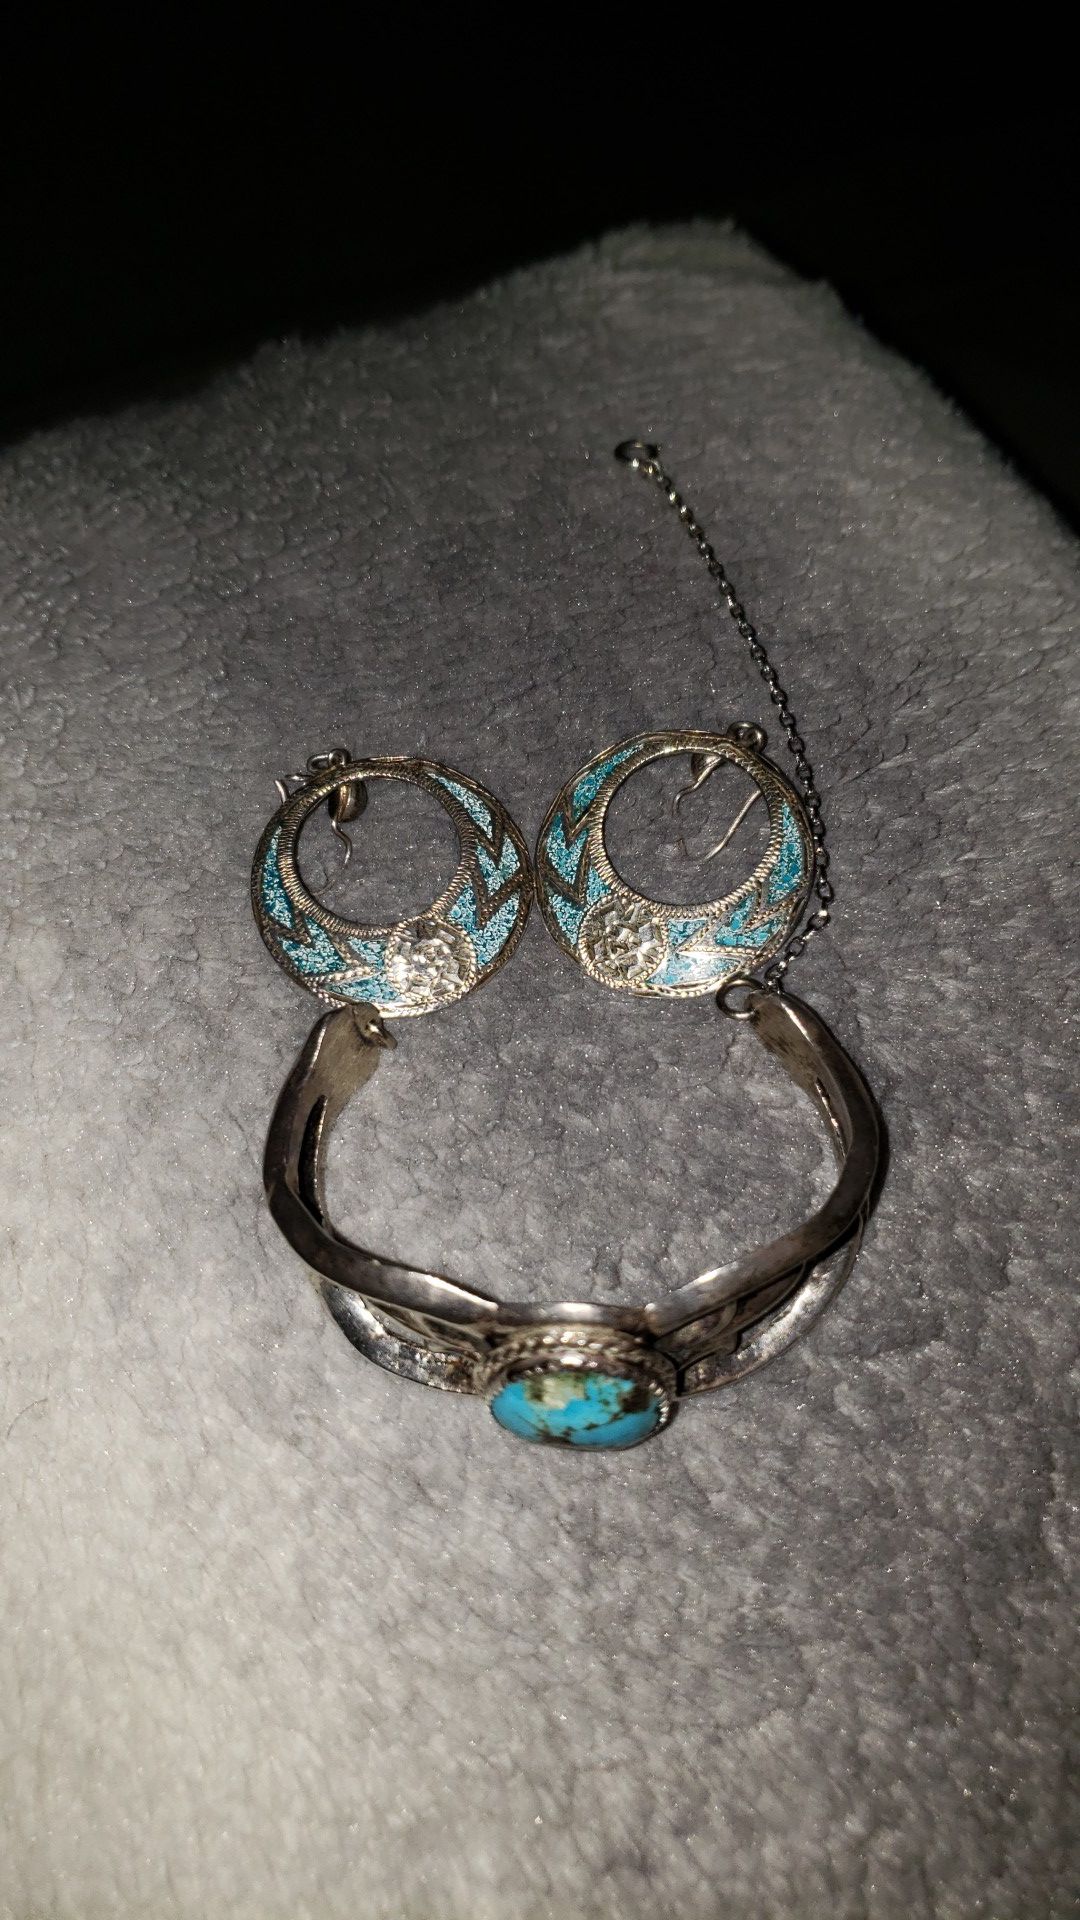 "Persian Blue" turquoise bracelet/anklet and Earring set!!